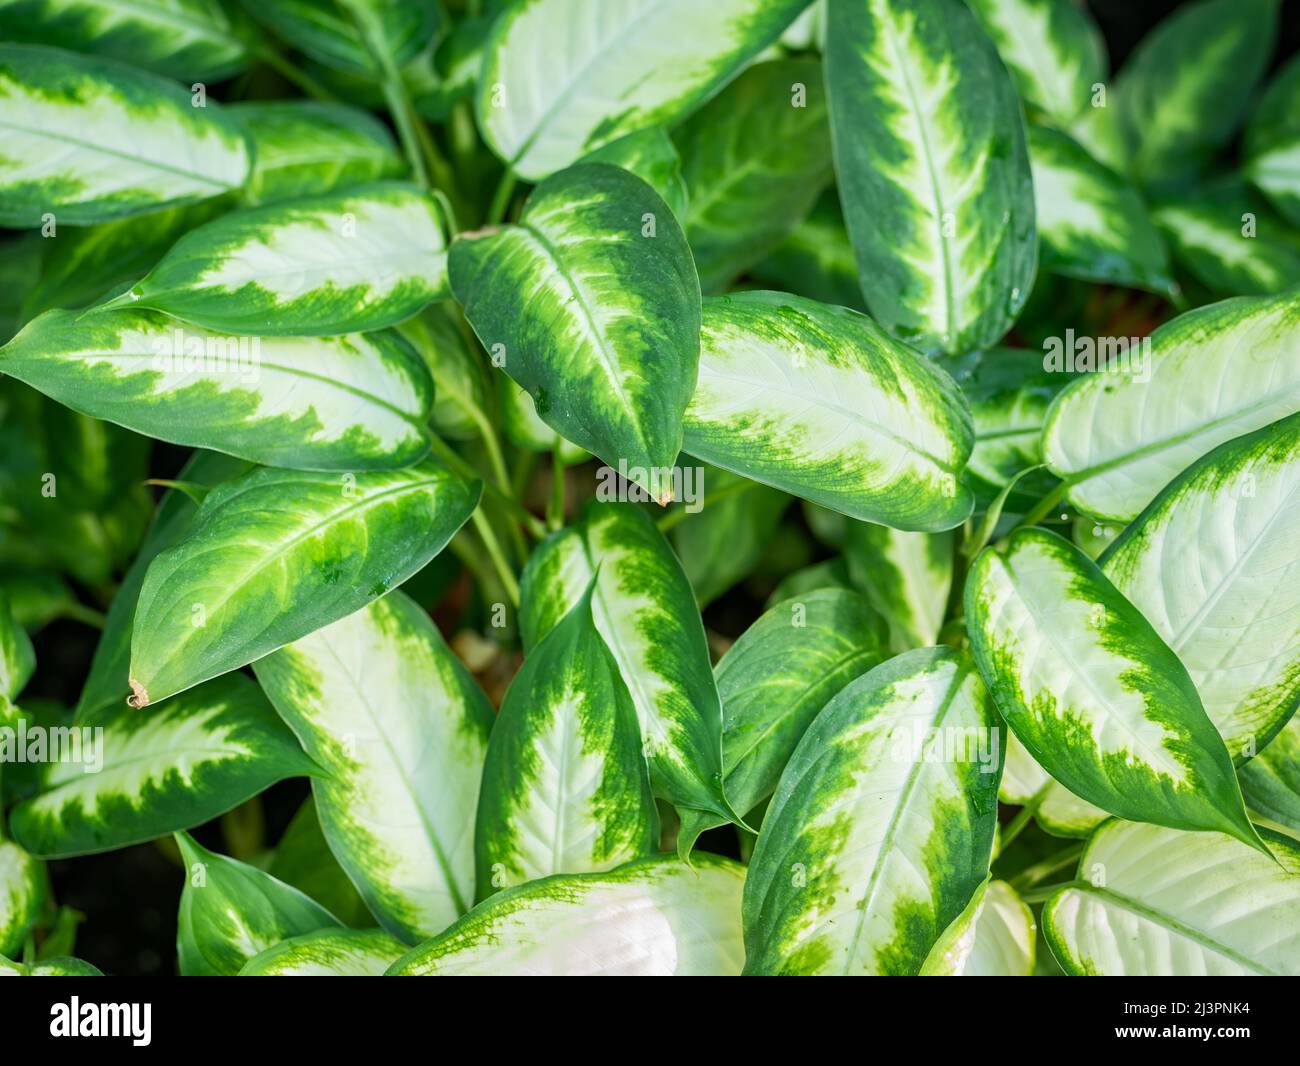 Close up with the foliage of the ornamental plant Dieffenbachia seguine, also known as dumbcane or tuftroot. Aglaonema pseudobracteatum green leaves Stock Photo